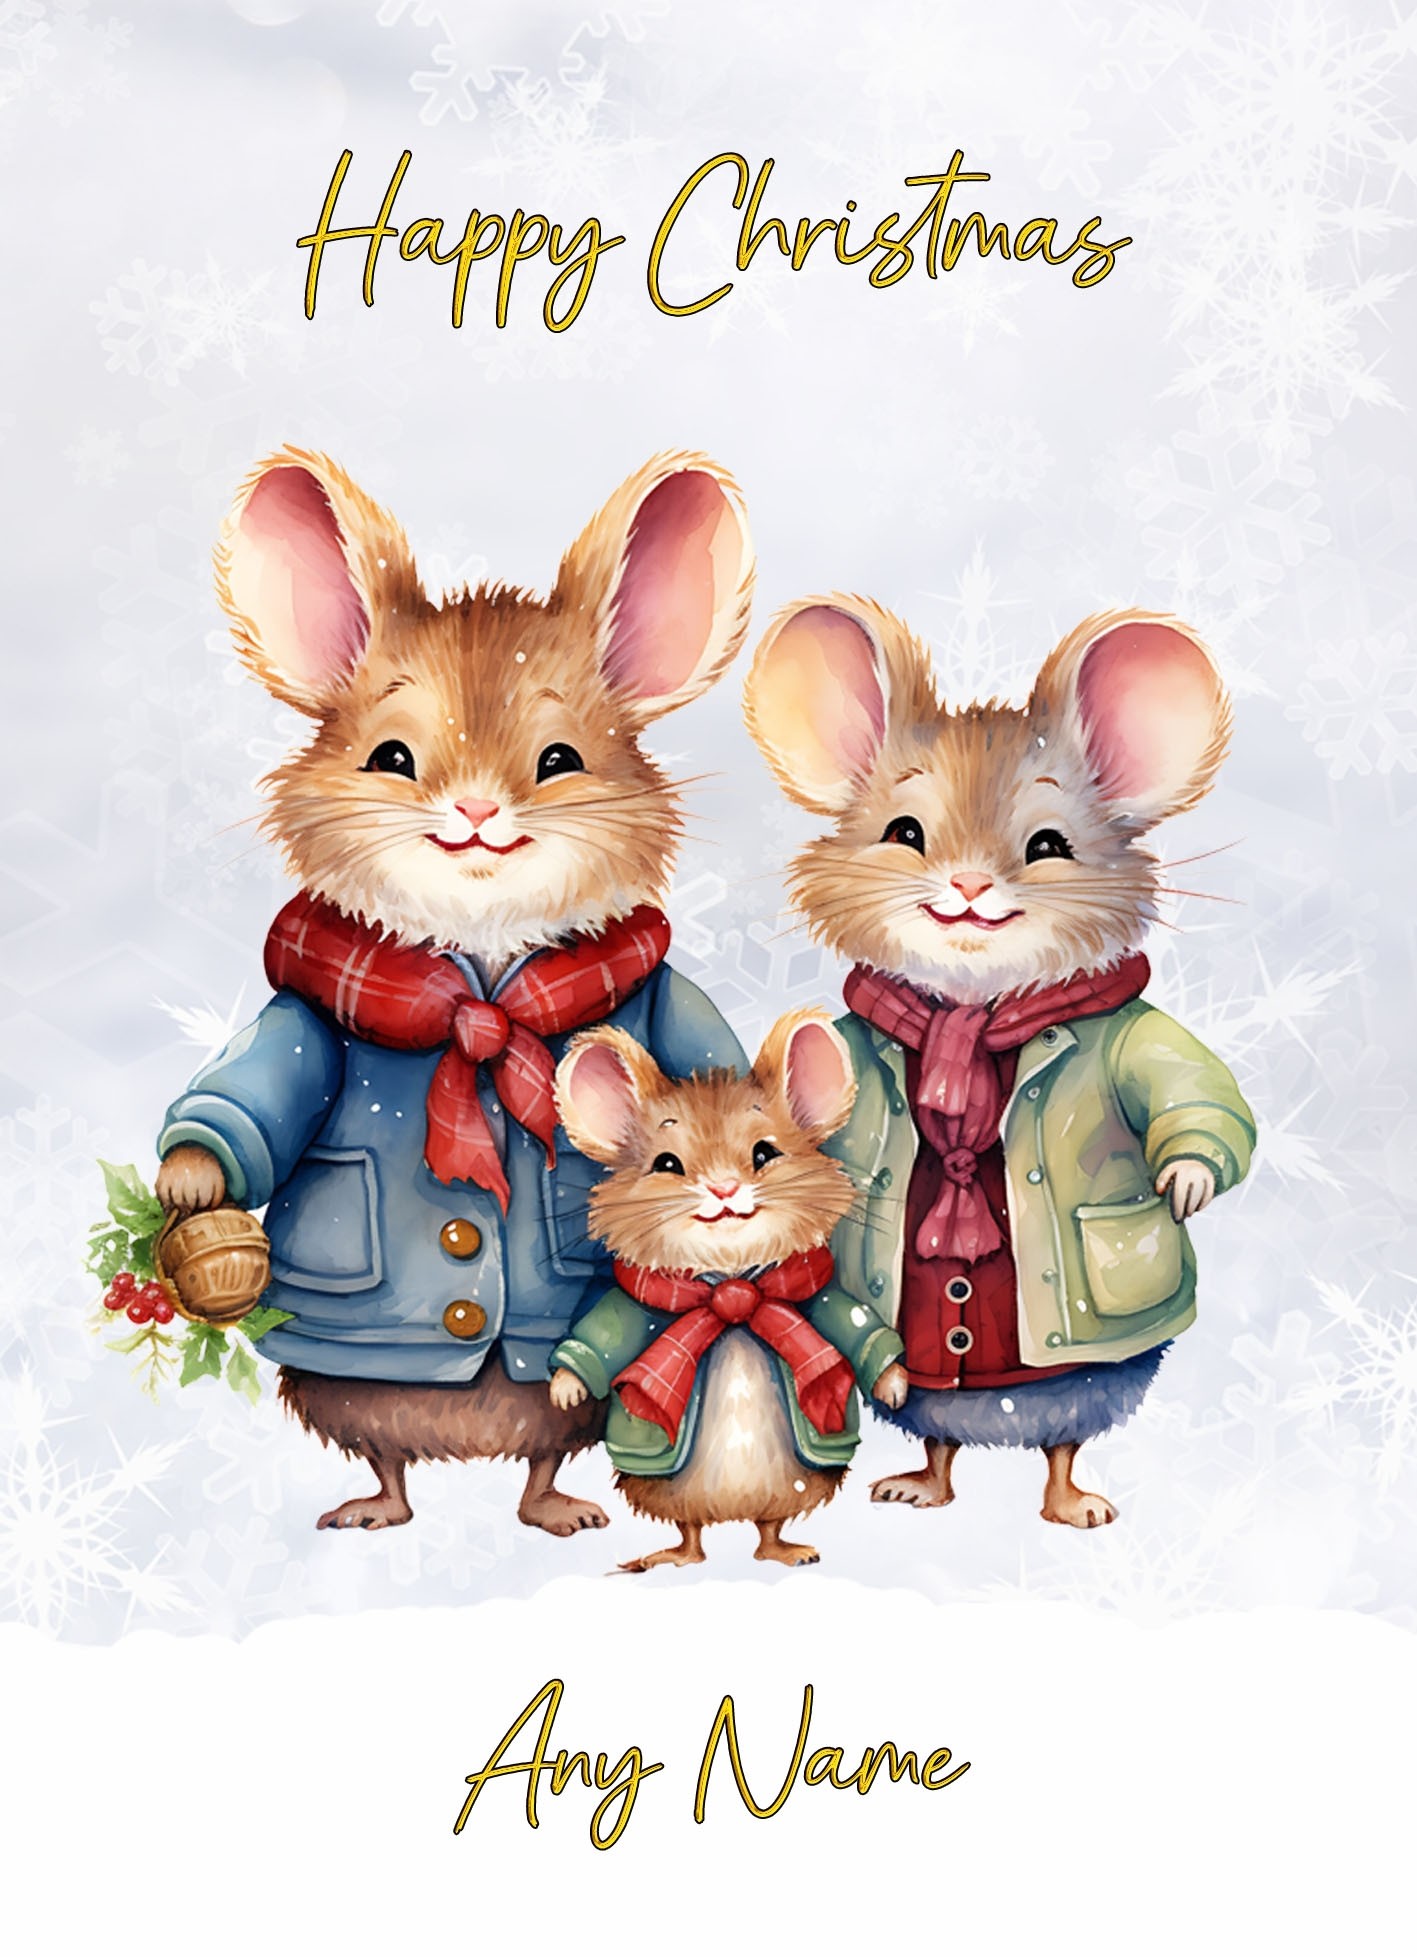 Personalised Mouse Family Christmas Card